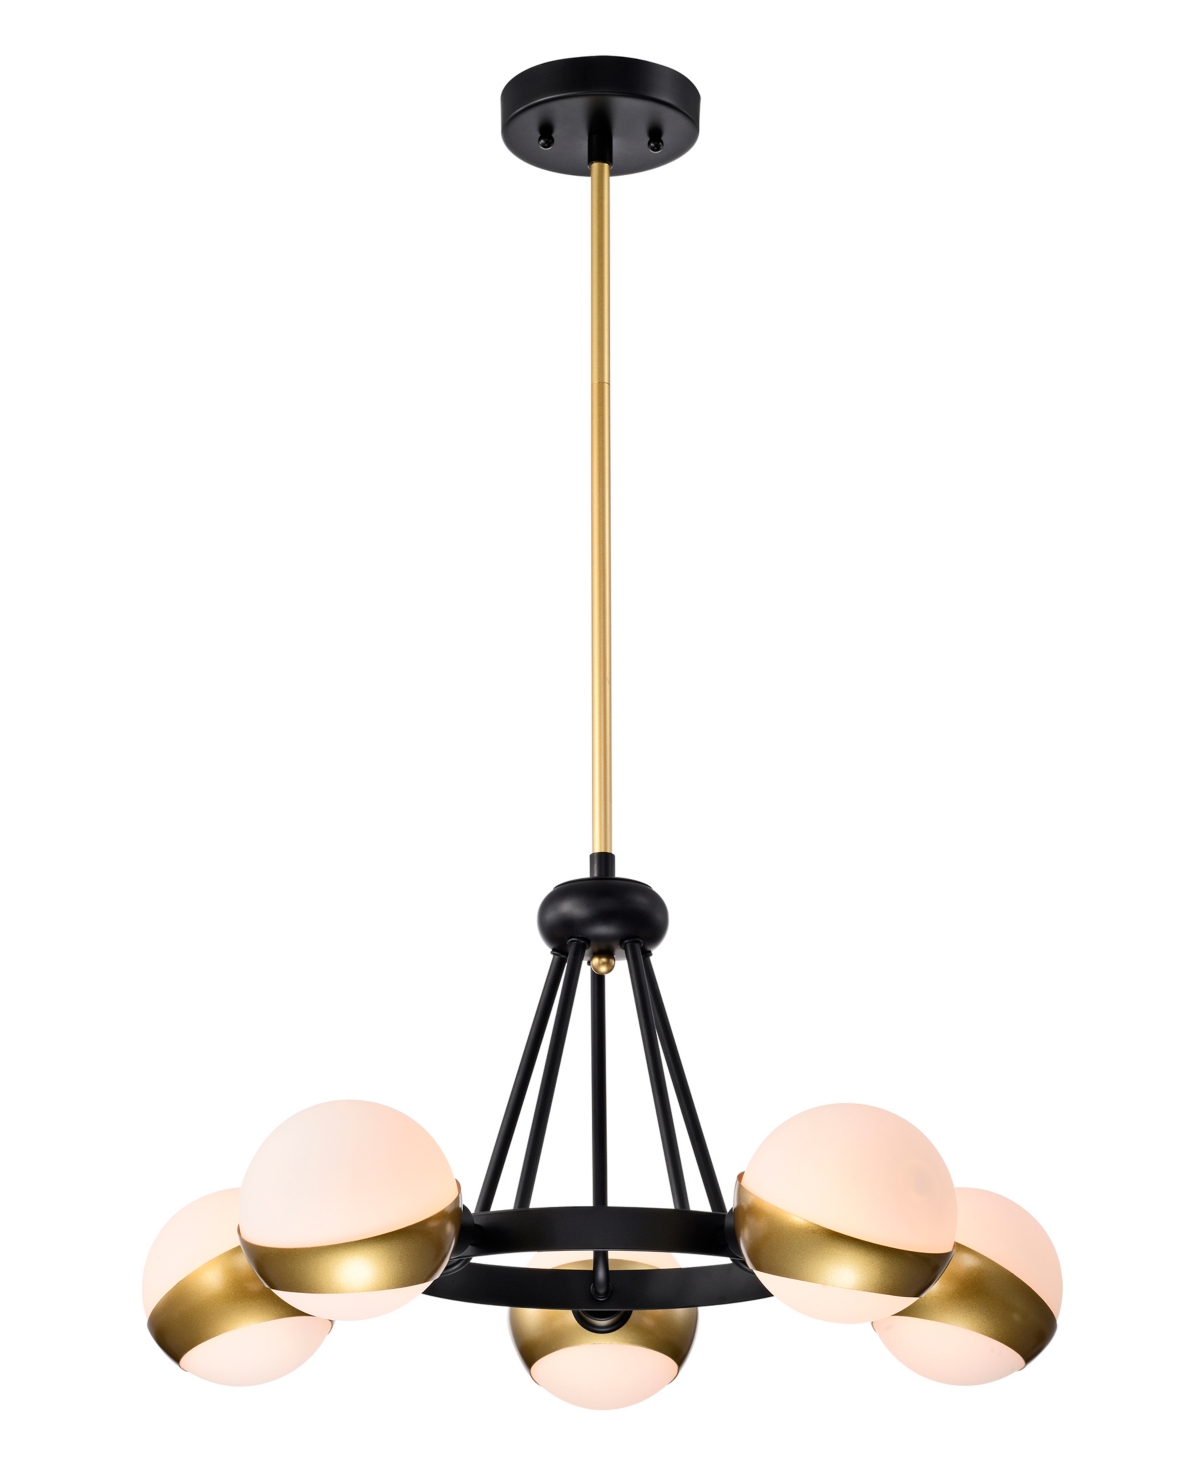 Home Accessories Melite 23" 5-light Indoor Chandelier With Light Kit In Matte Black And Satin Gold